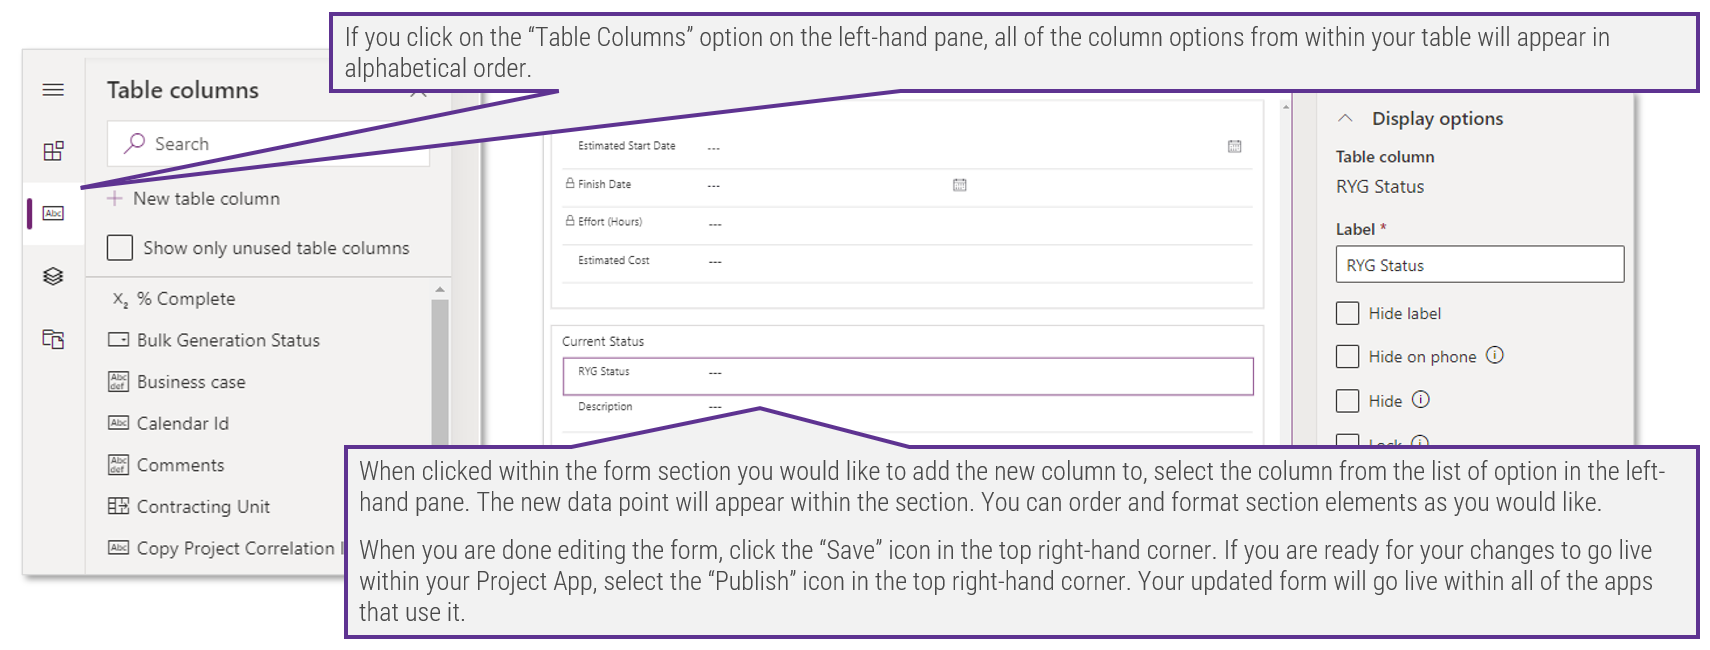 Screenshot of the 'Table Columns' window in 'Power Apps' and instructions for adding table columns.